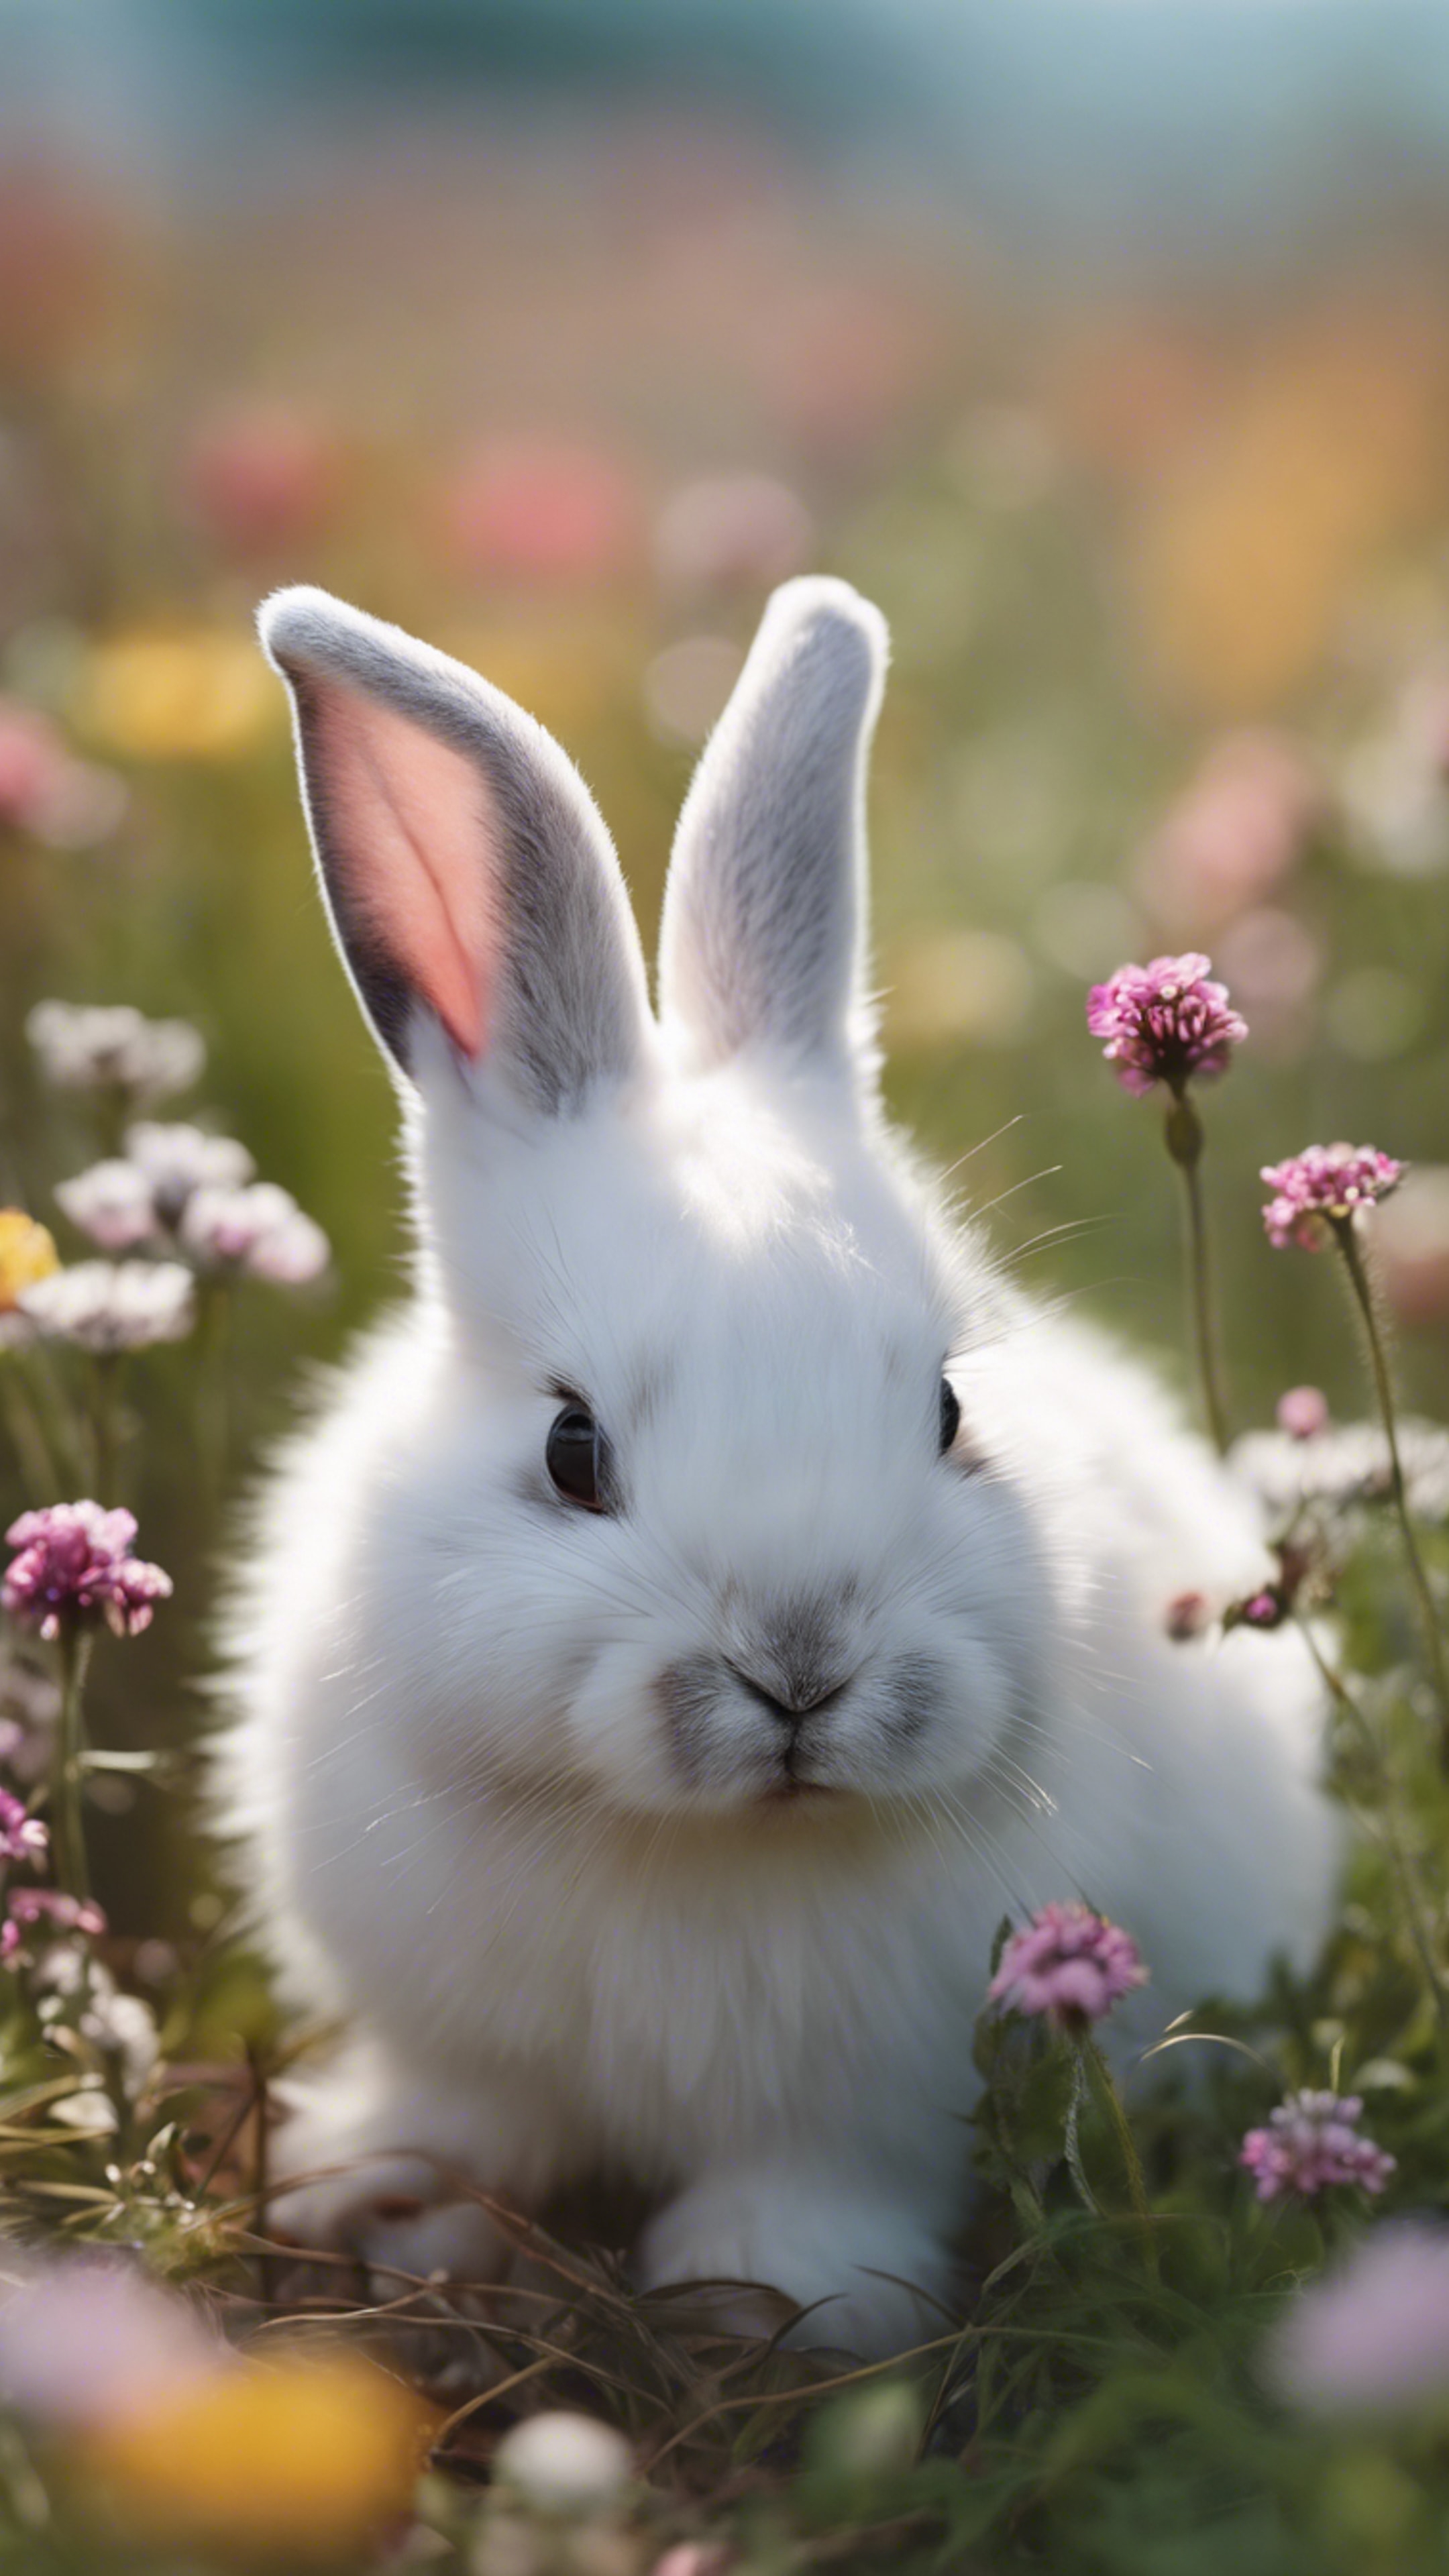 A baby rabbit, pure white with soft fur, sitting in a field of colourful wildflowers.壁紙[5acfd060e3b540278292]